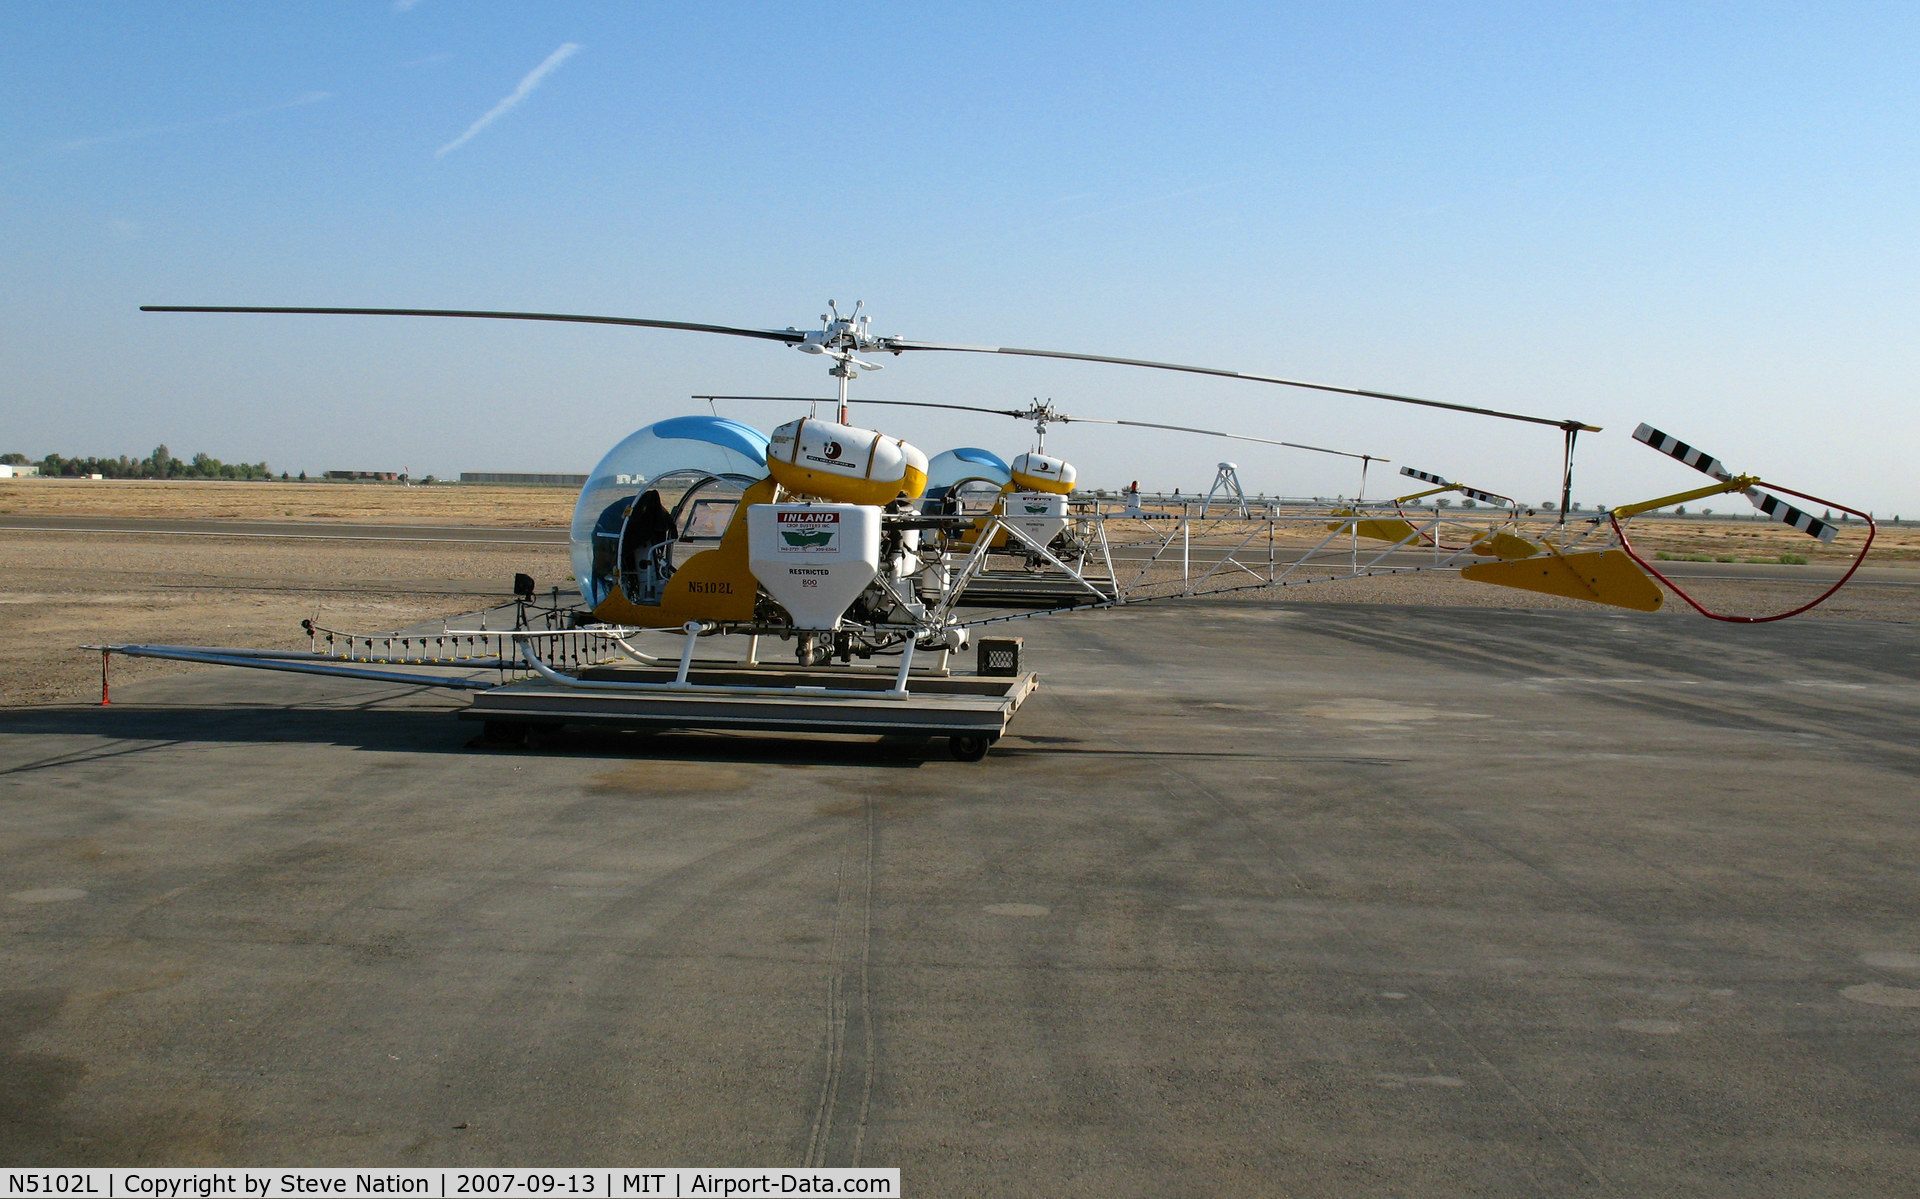 N5102L, 1967 Bell 47G-4A C/N 7560, Inland Crop Dusters 1967 Bell 47G-4A sprayer @ Shafter, CA